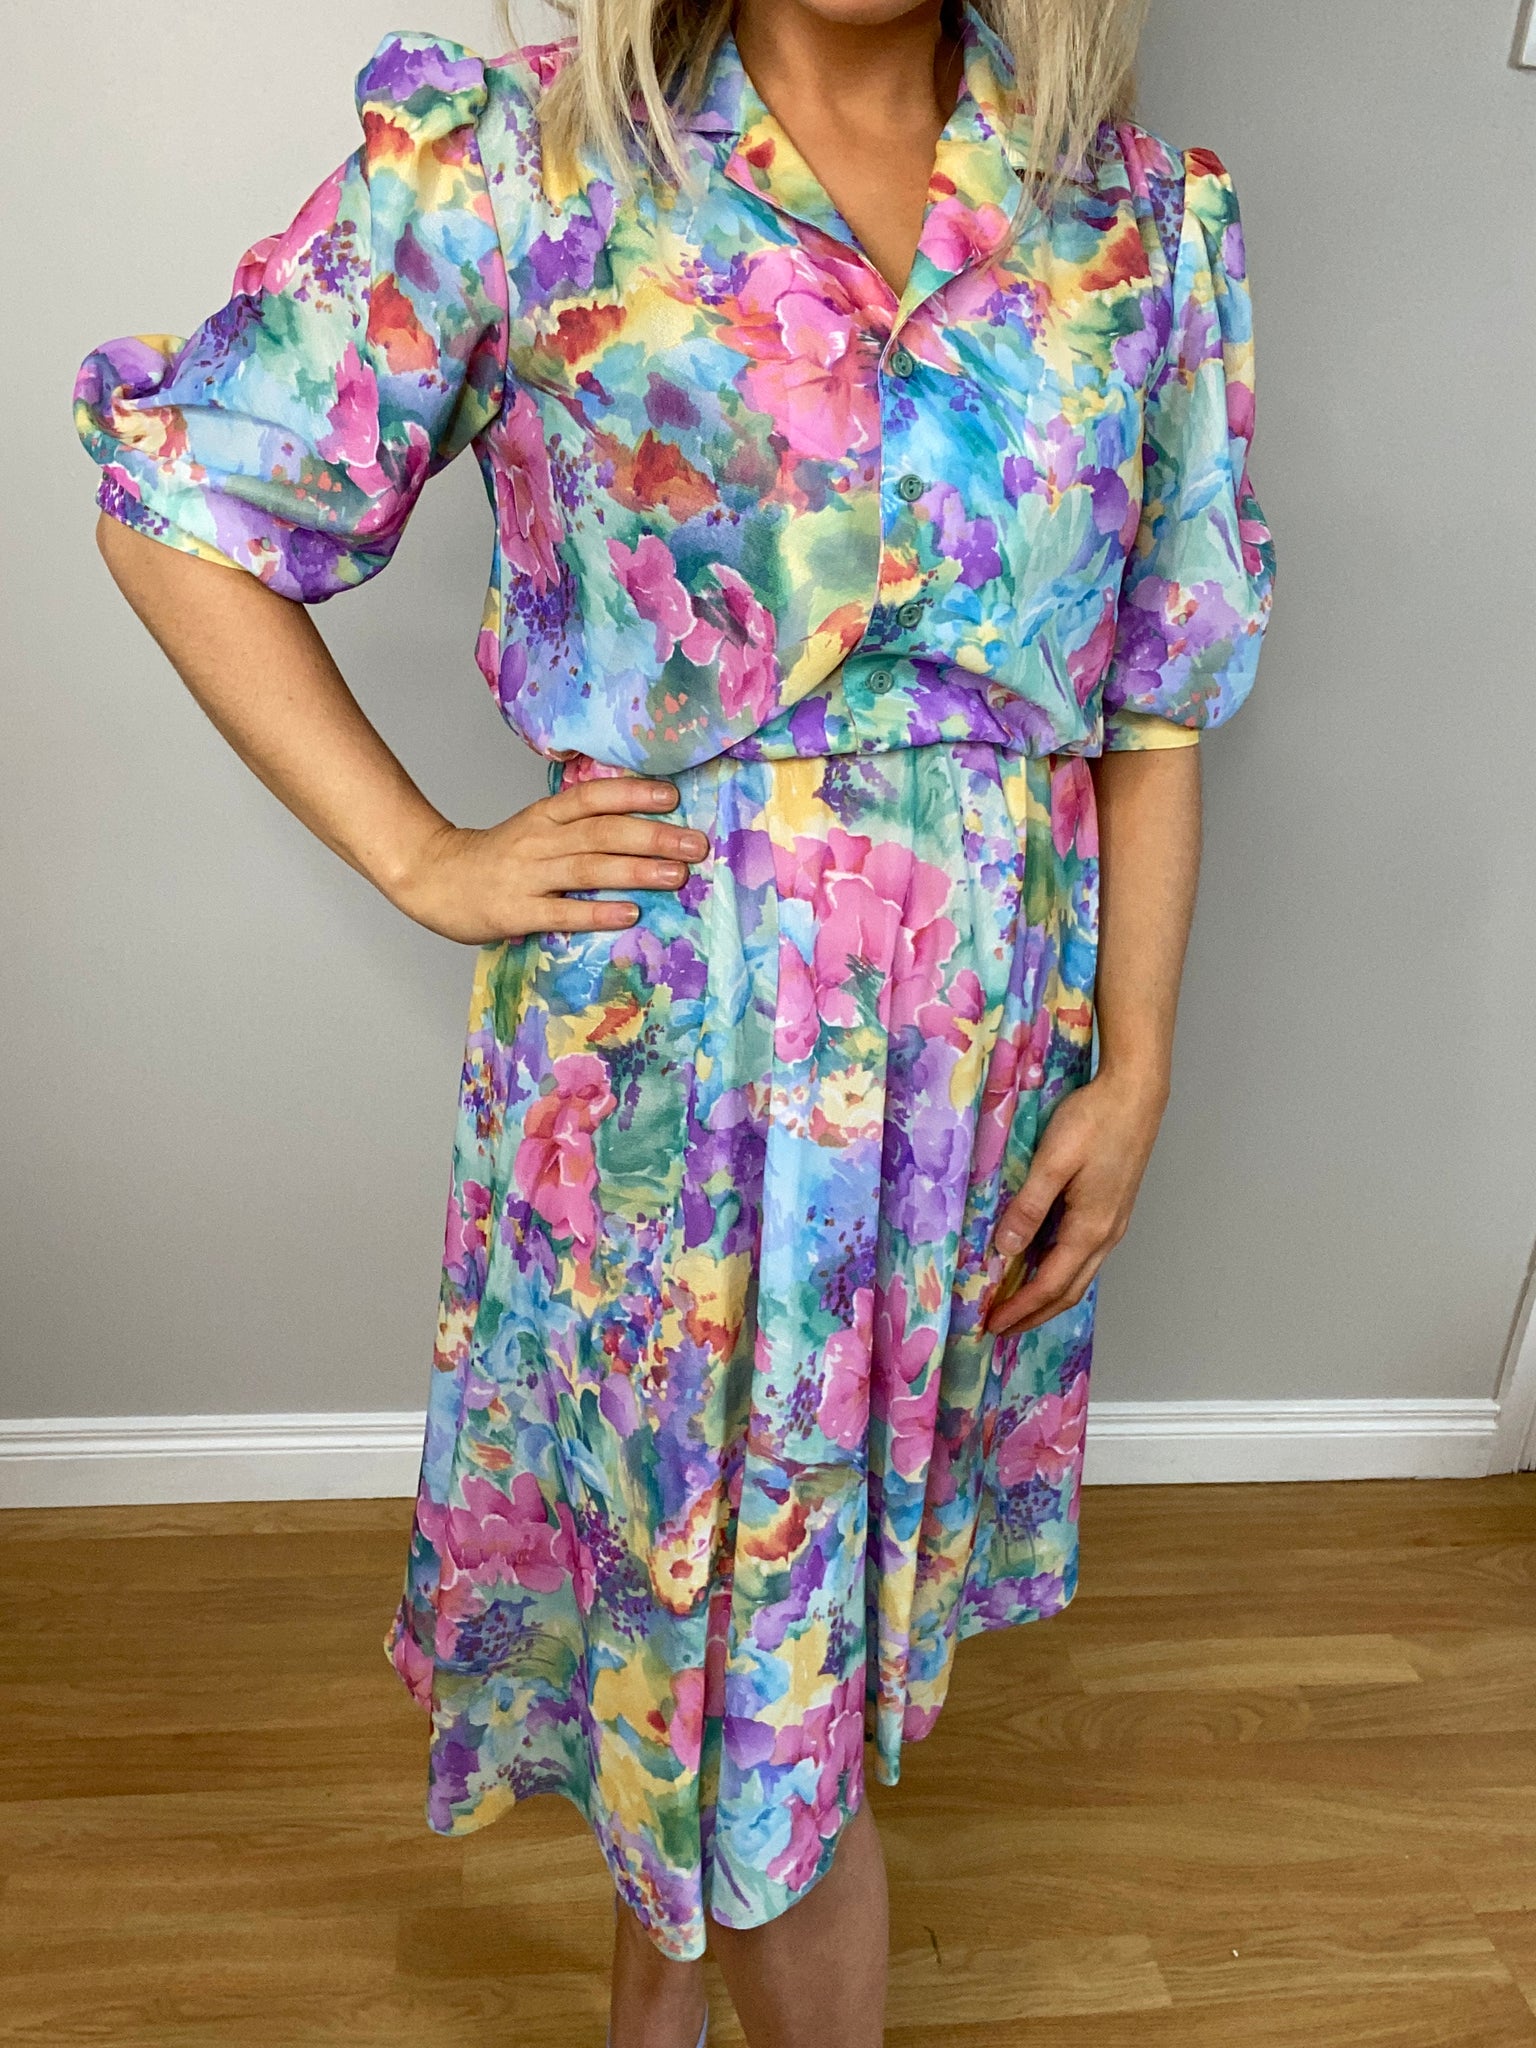 Pastel Floral Midi Dress (Up to a size ...